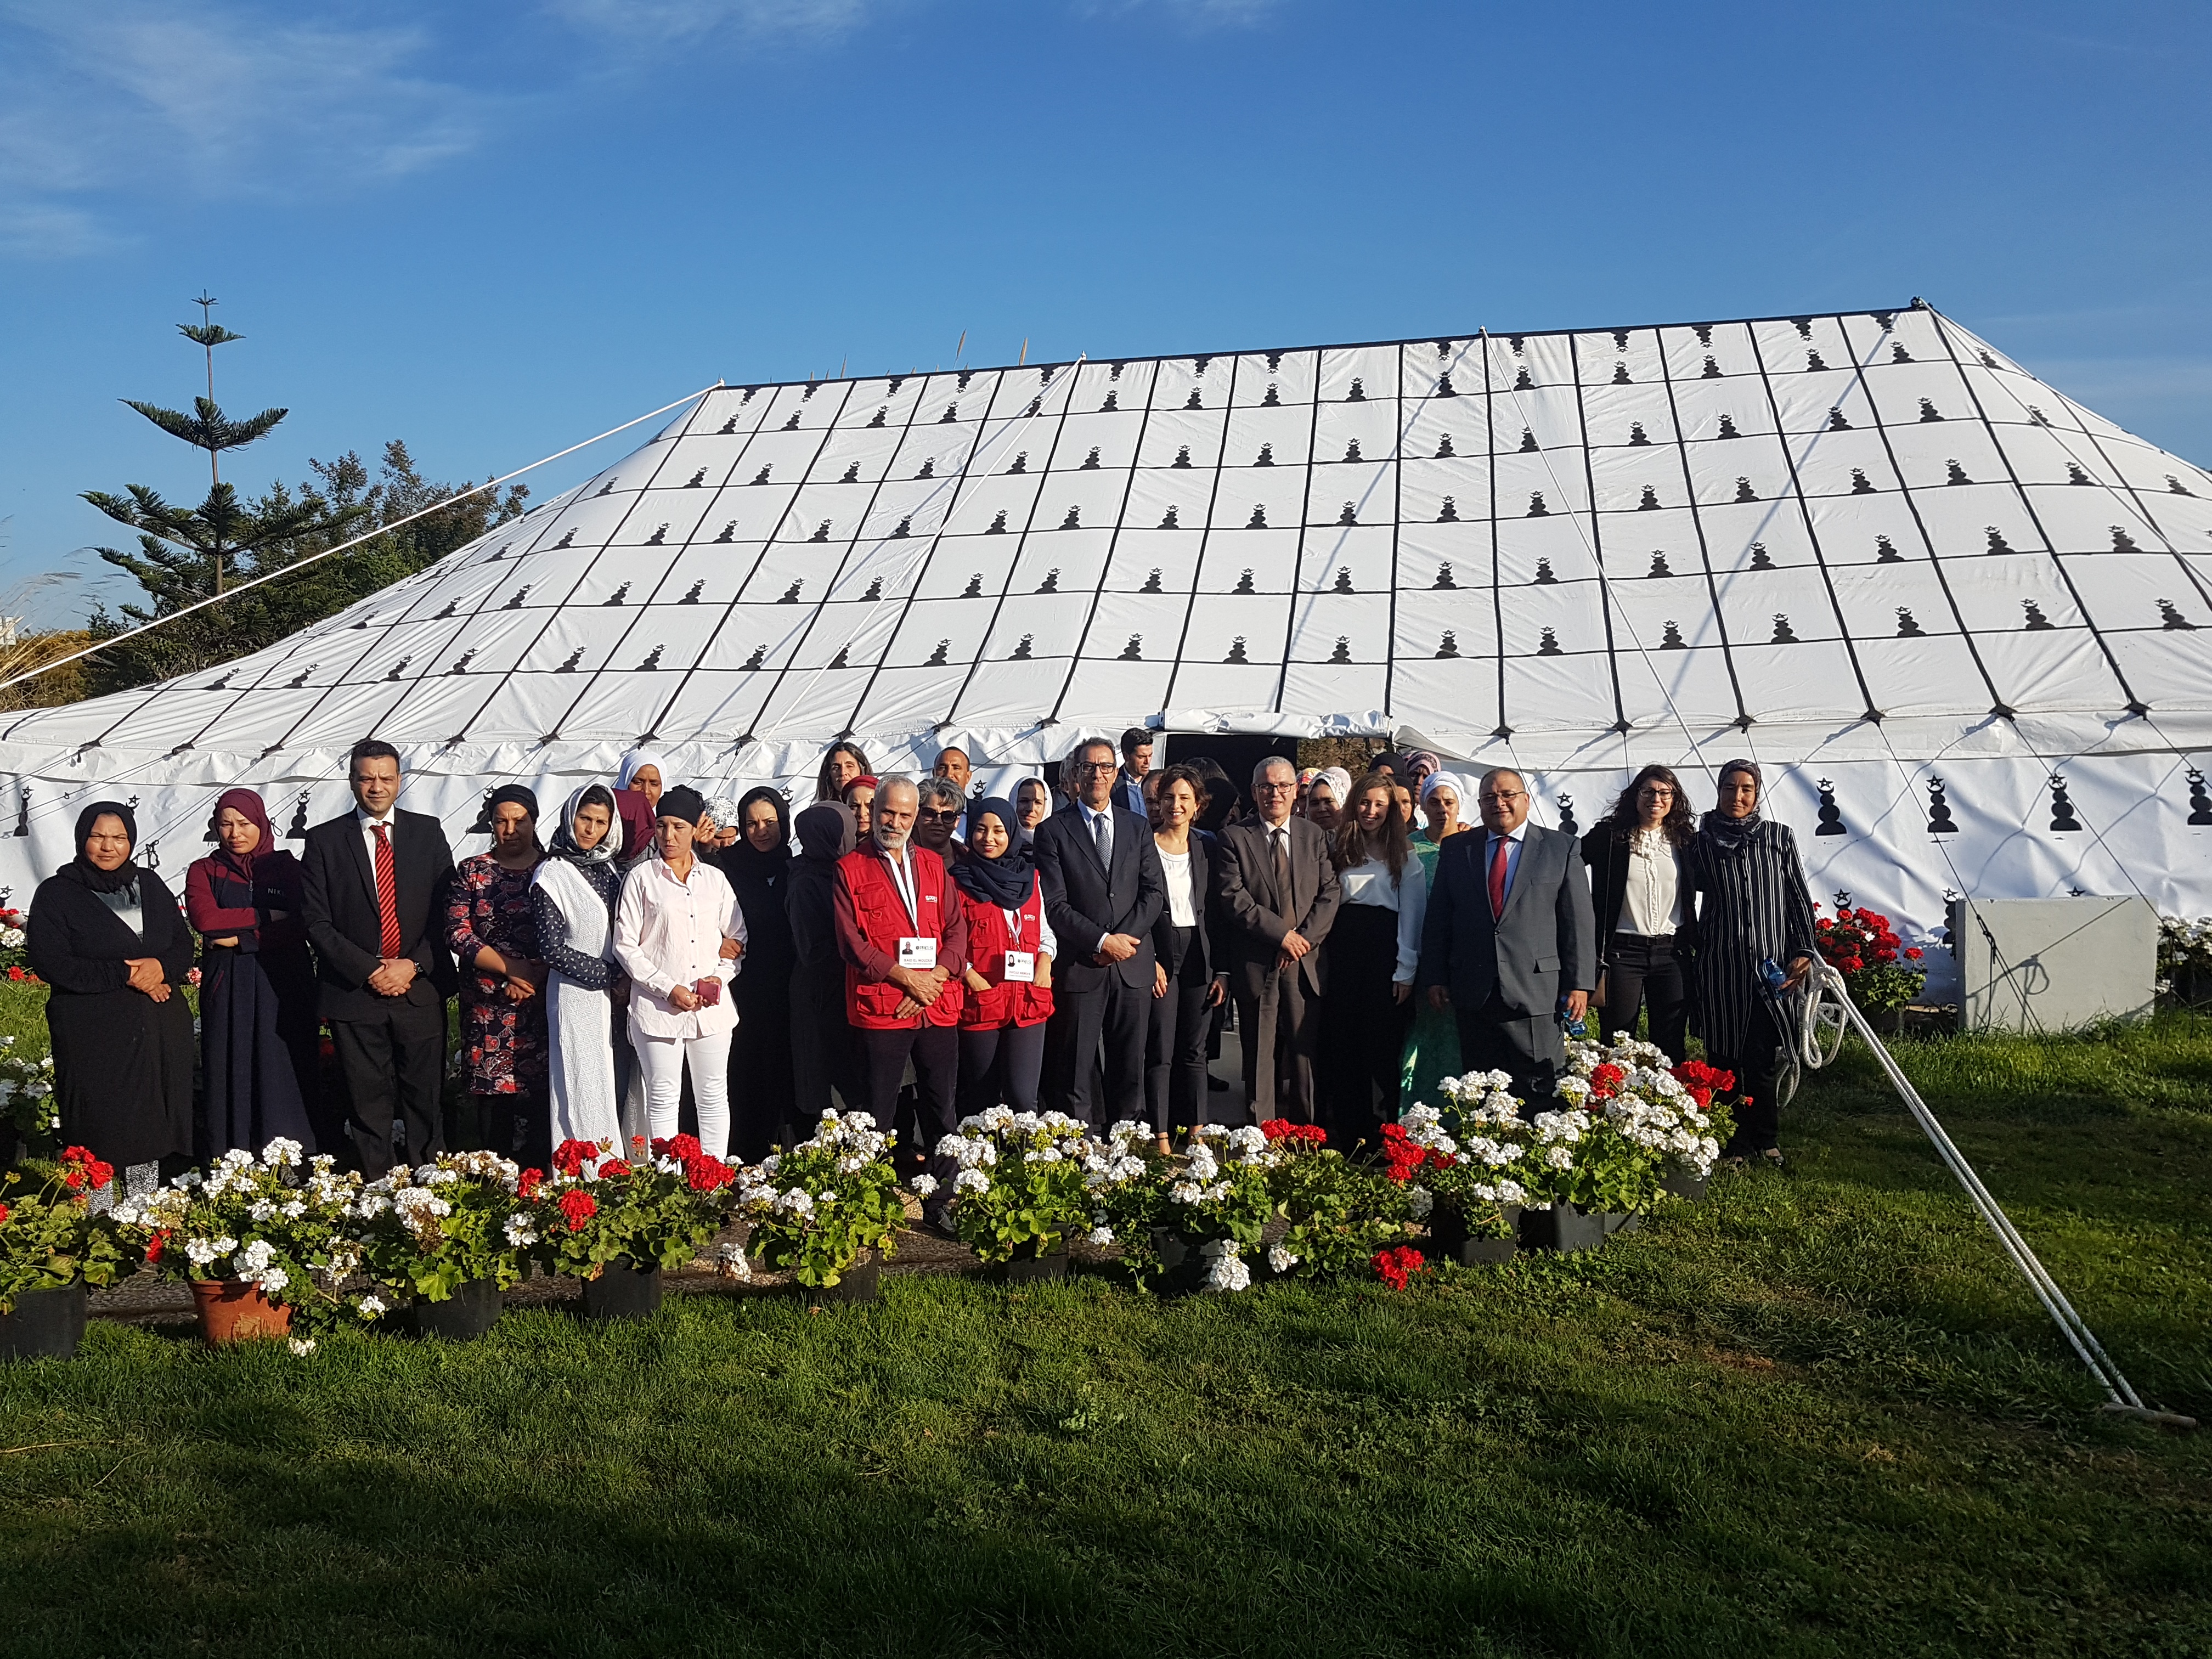 THE MAXIMAL MOROCCAN AUTHORITIES OF MIGRATIONS VISIT AGROMARTIN